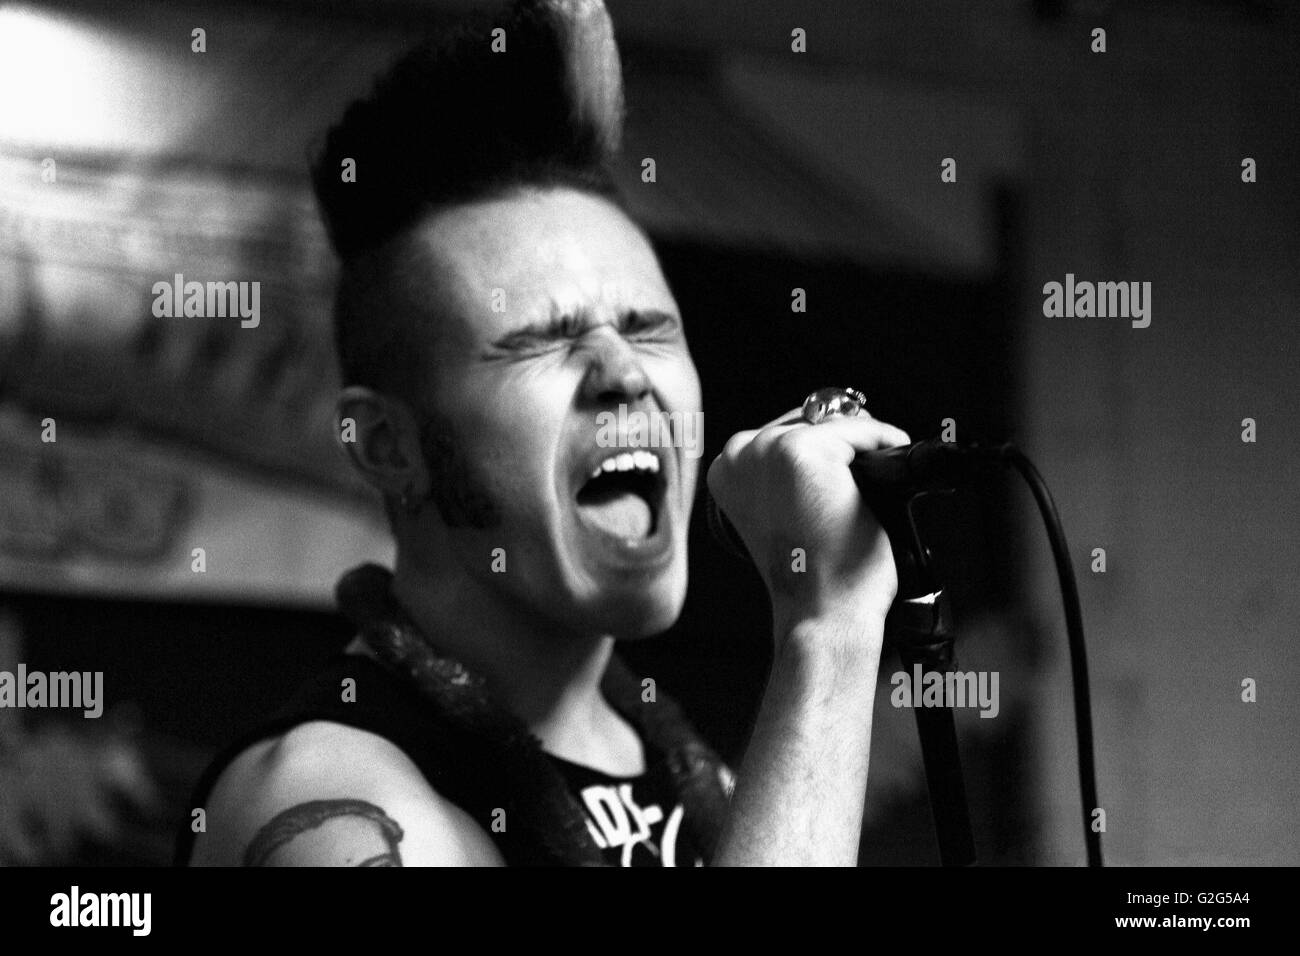 Male Band Singer Screaming into Microphone Stock Photo